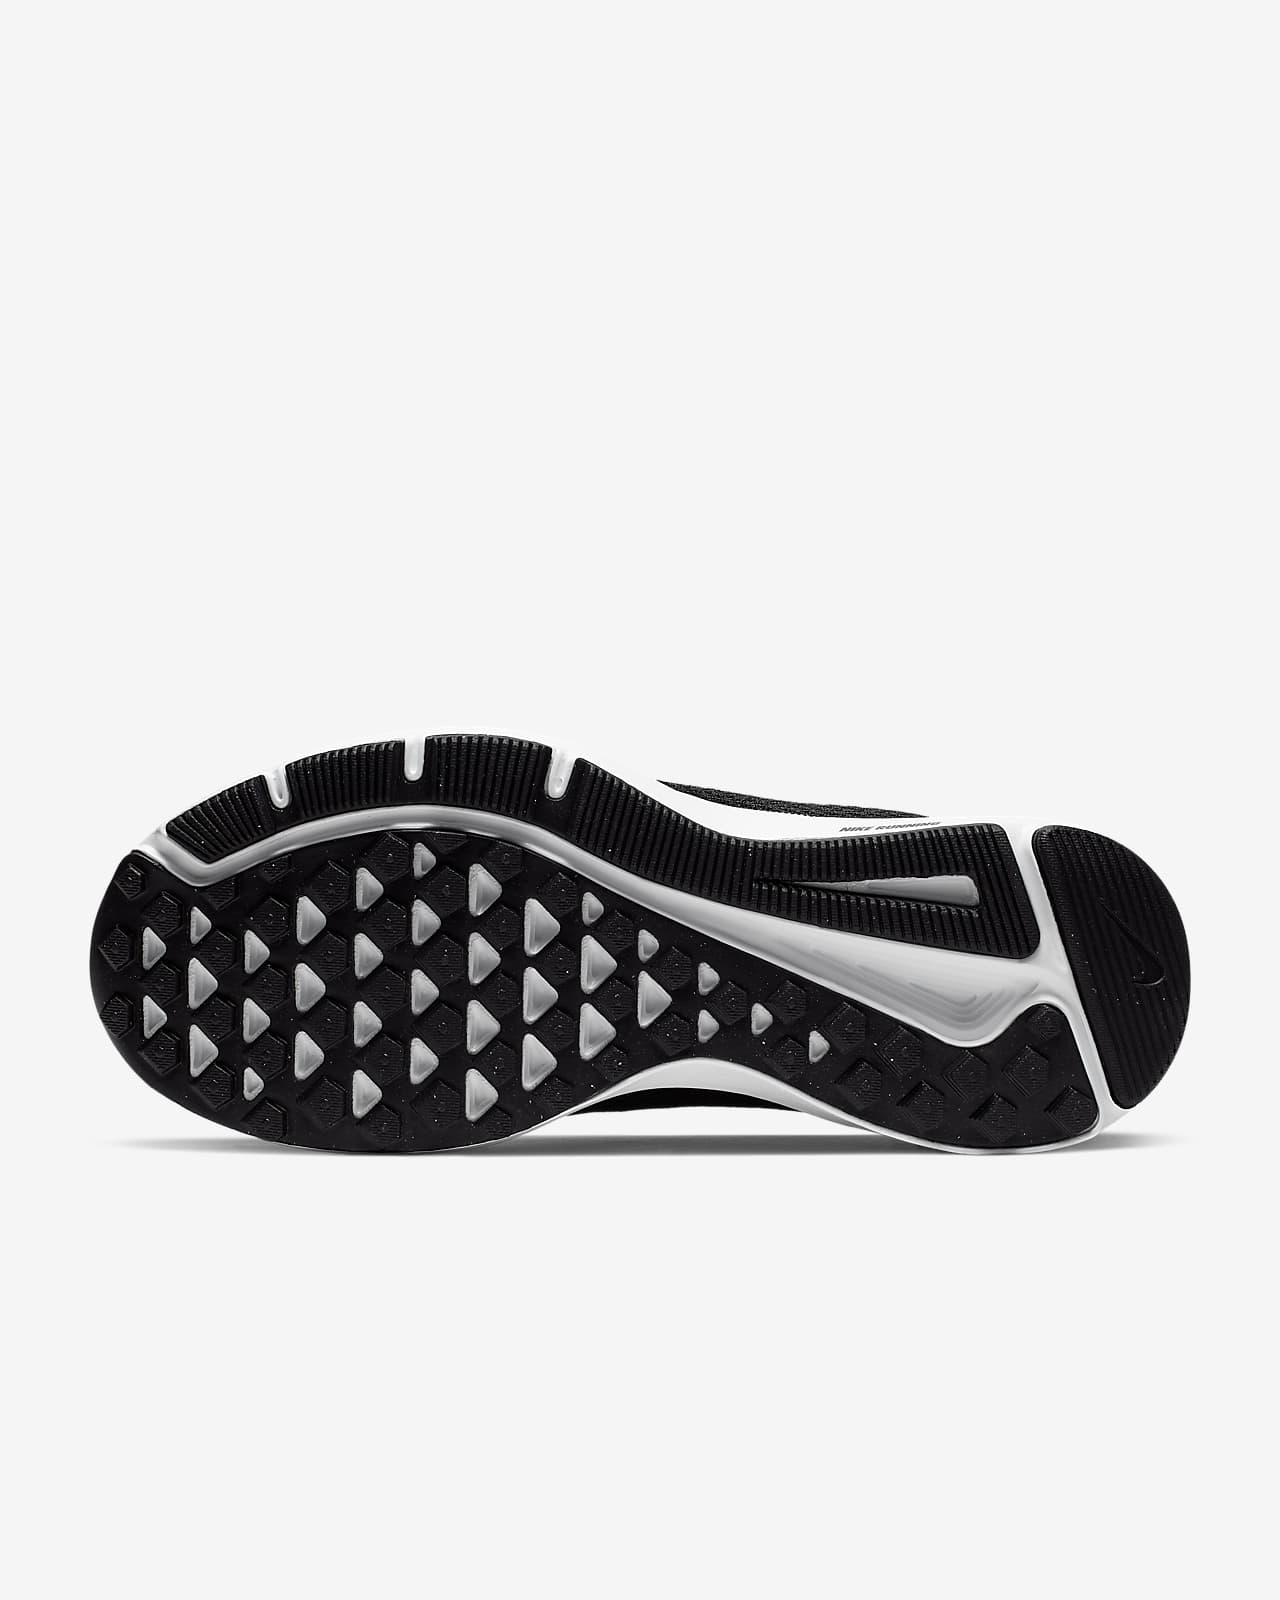 nike quest 2 women's black and white